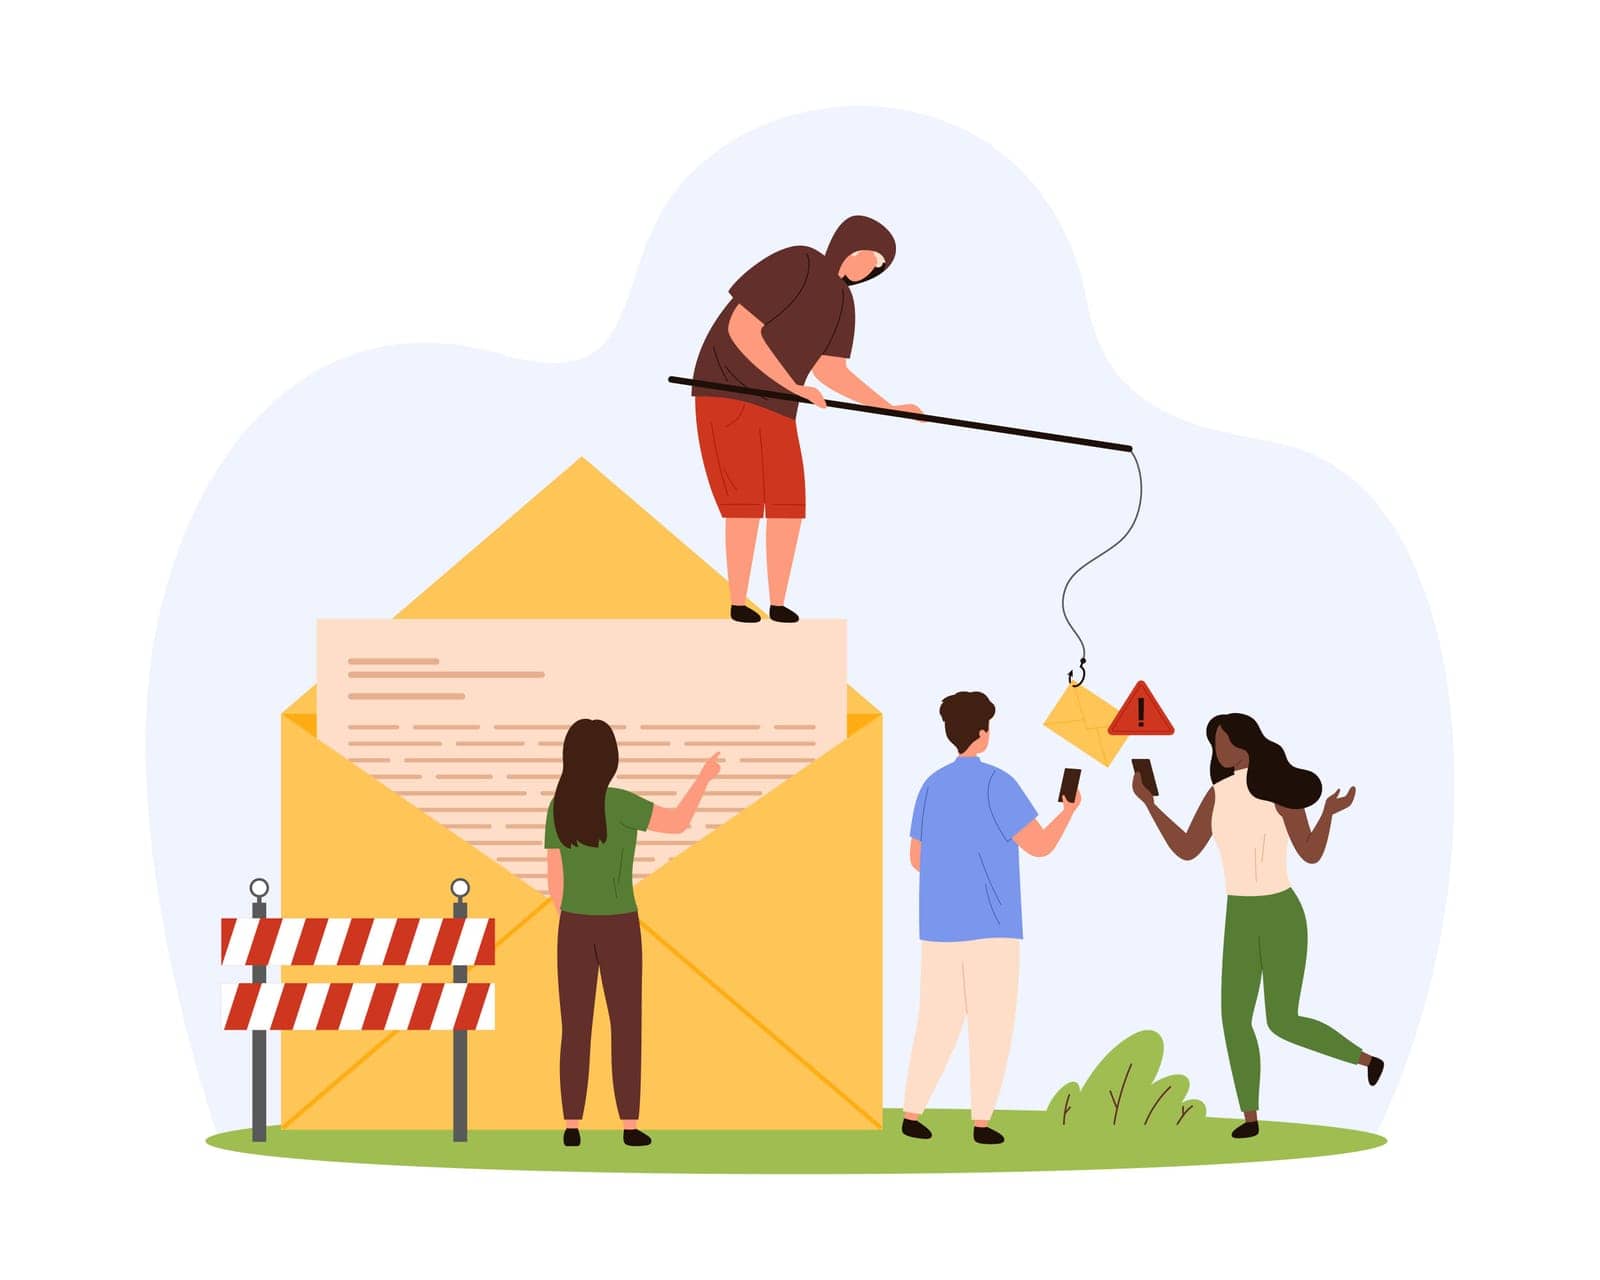 Fraud, scam and phishing with emails. Tiny thief sitting on giant open envelope to catch letter on fishing rod hook, people protect personal documents from cyber theft cartoon vector illustration